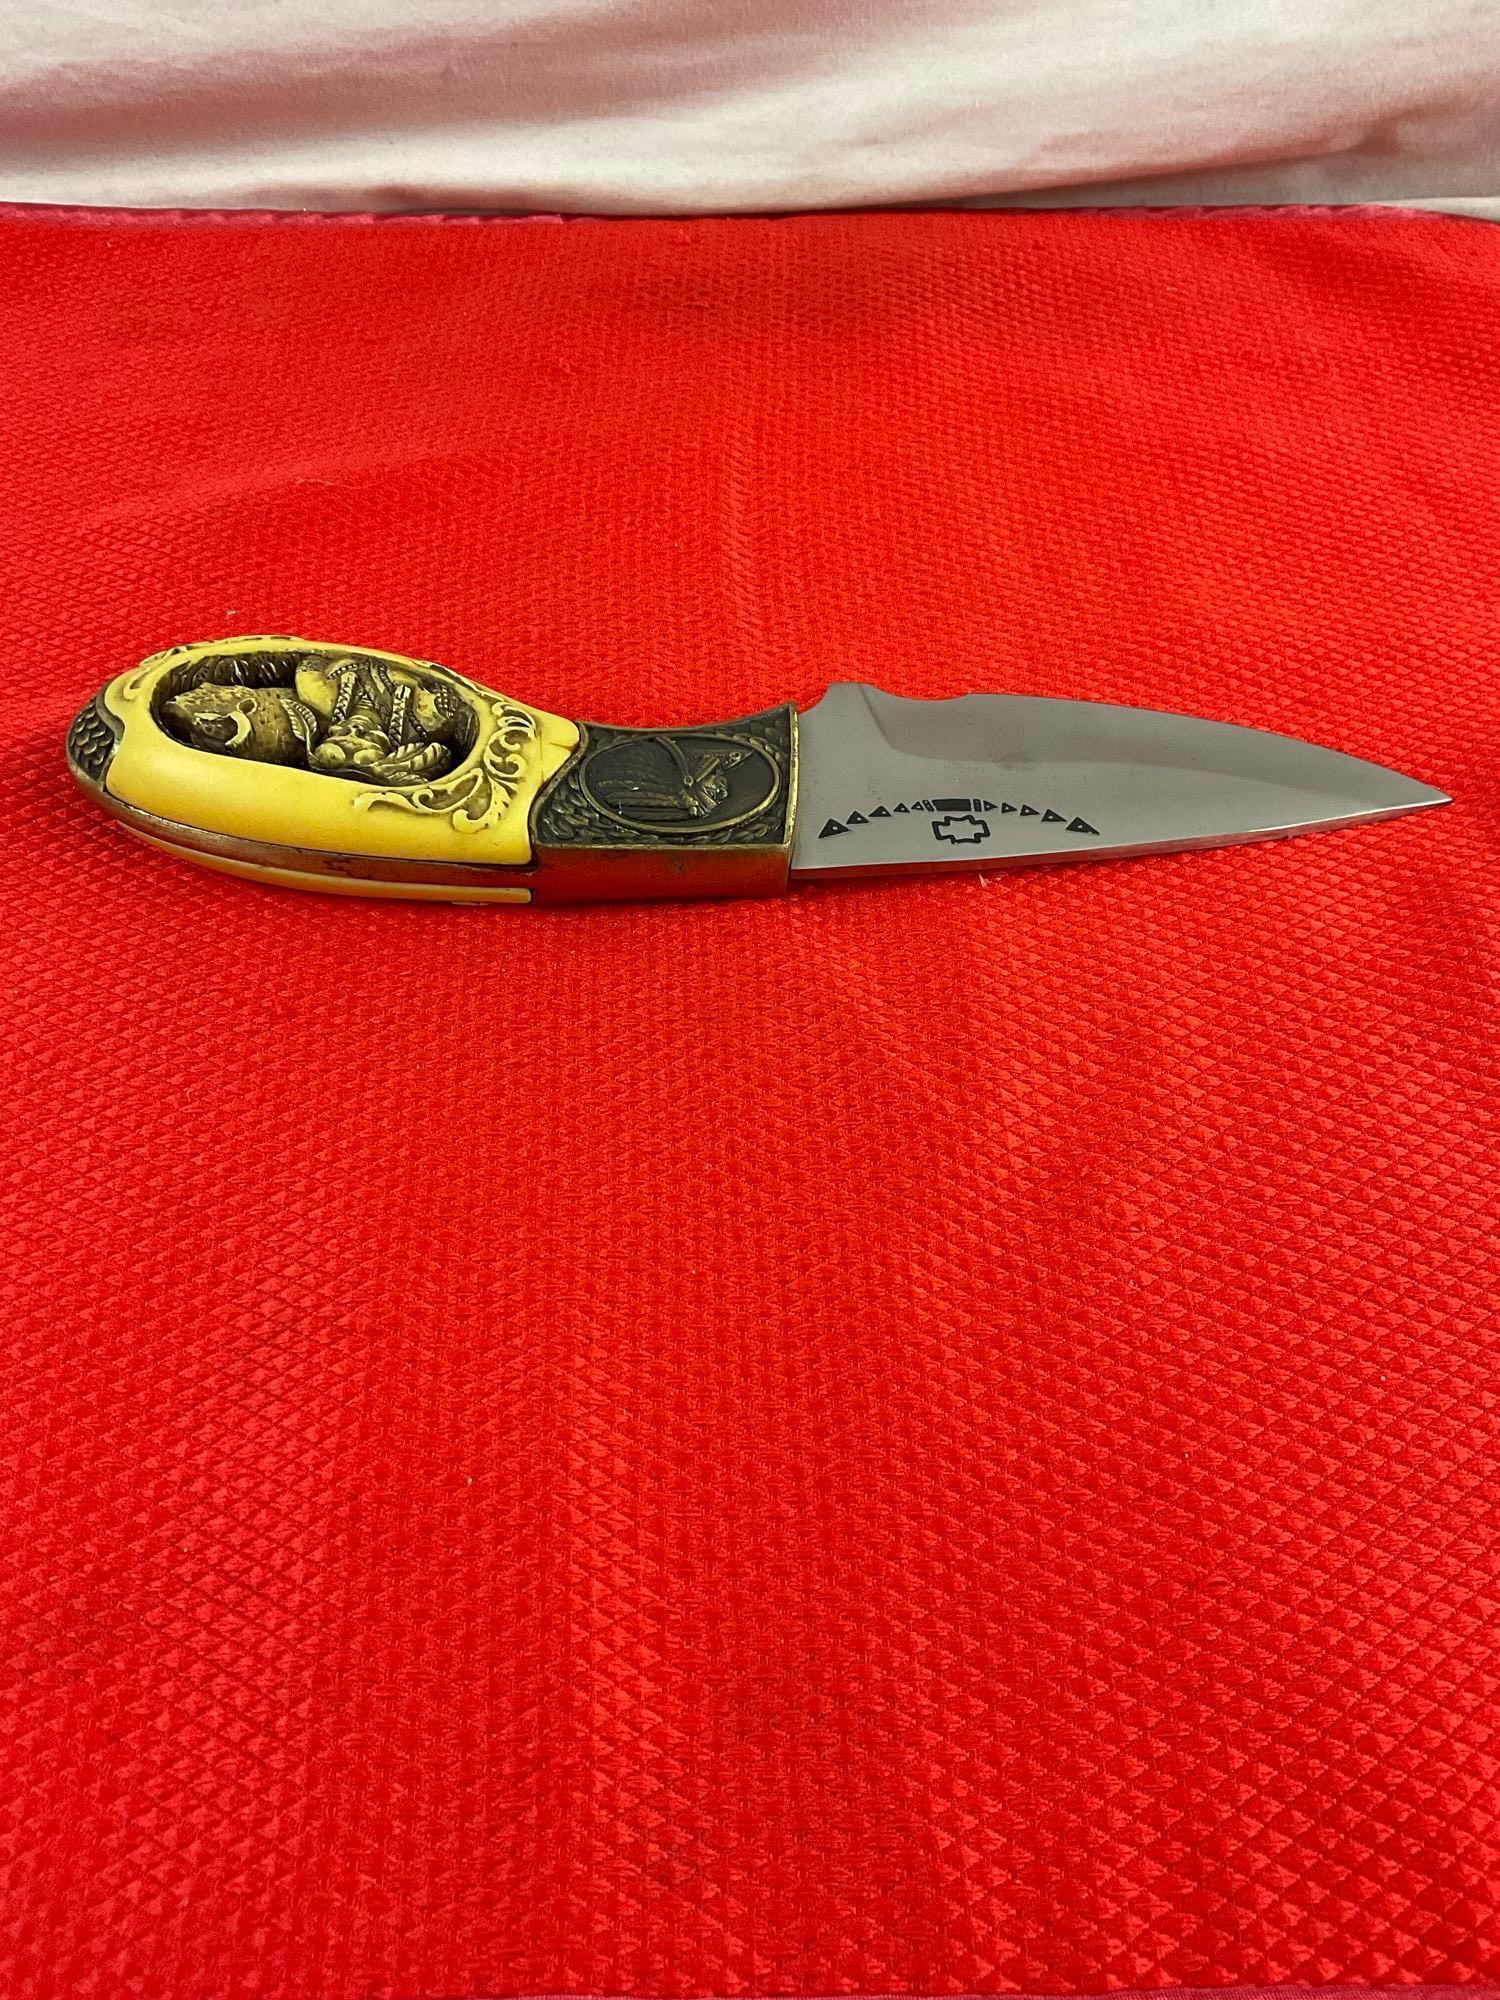 Tomahawk XL0848 Stainless Steel Fixed Blade Knife w/ Warrior Brave Carved Resin Handle. See pics.